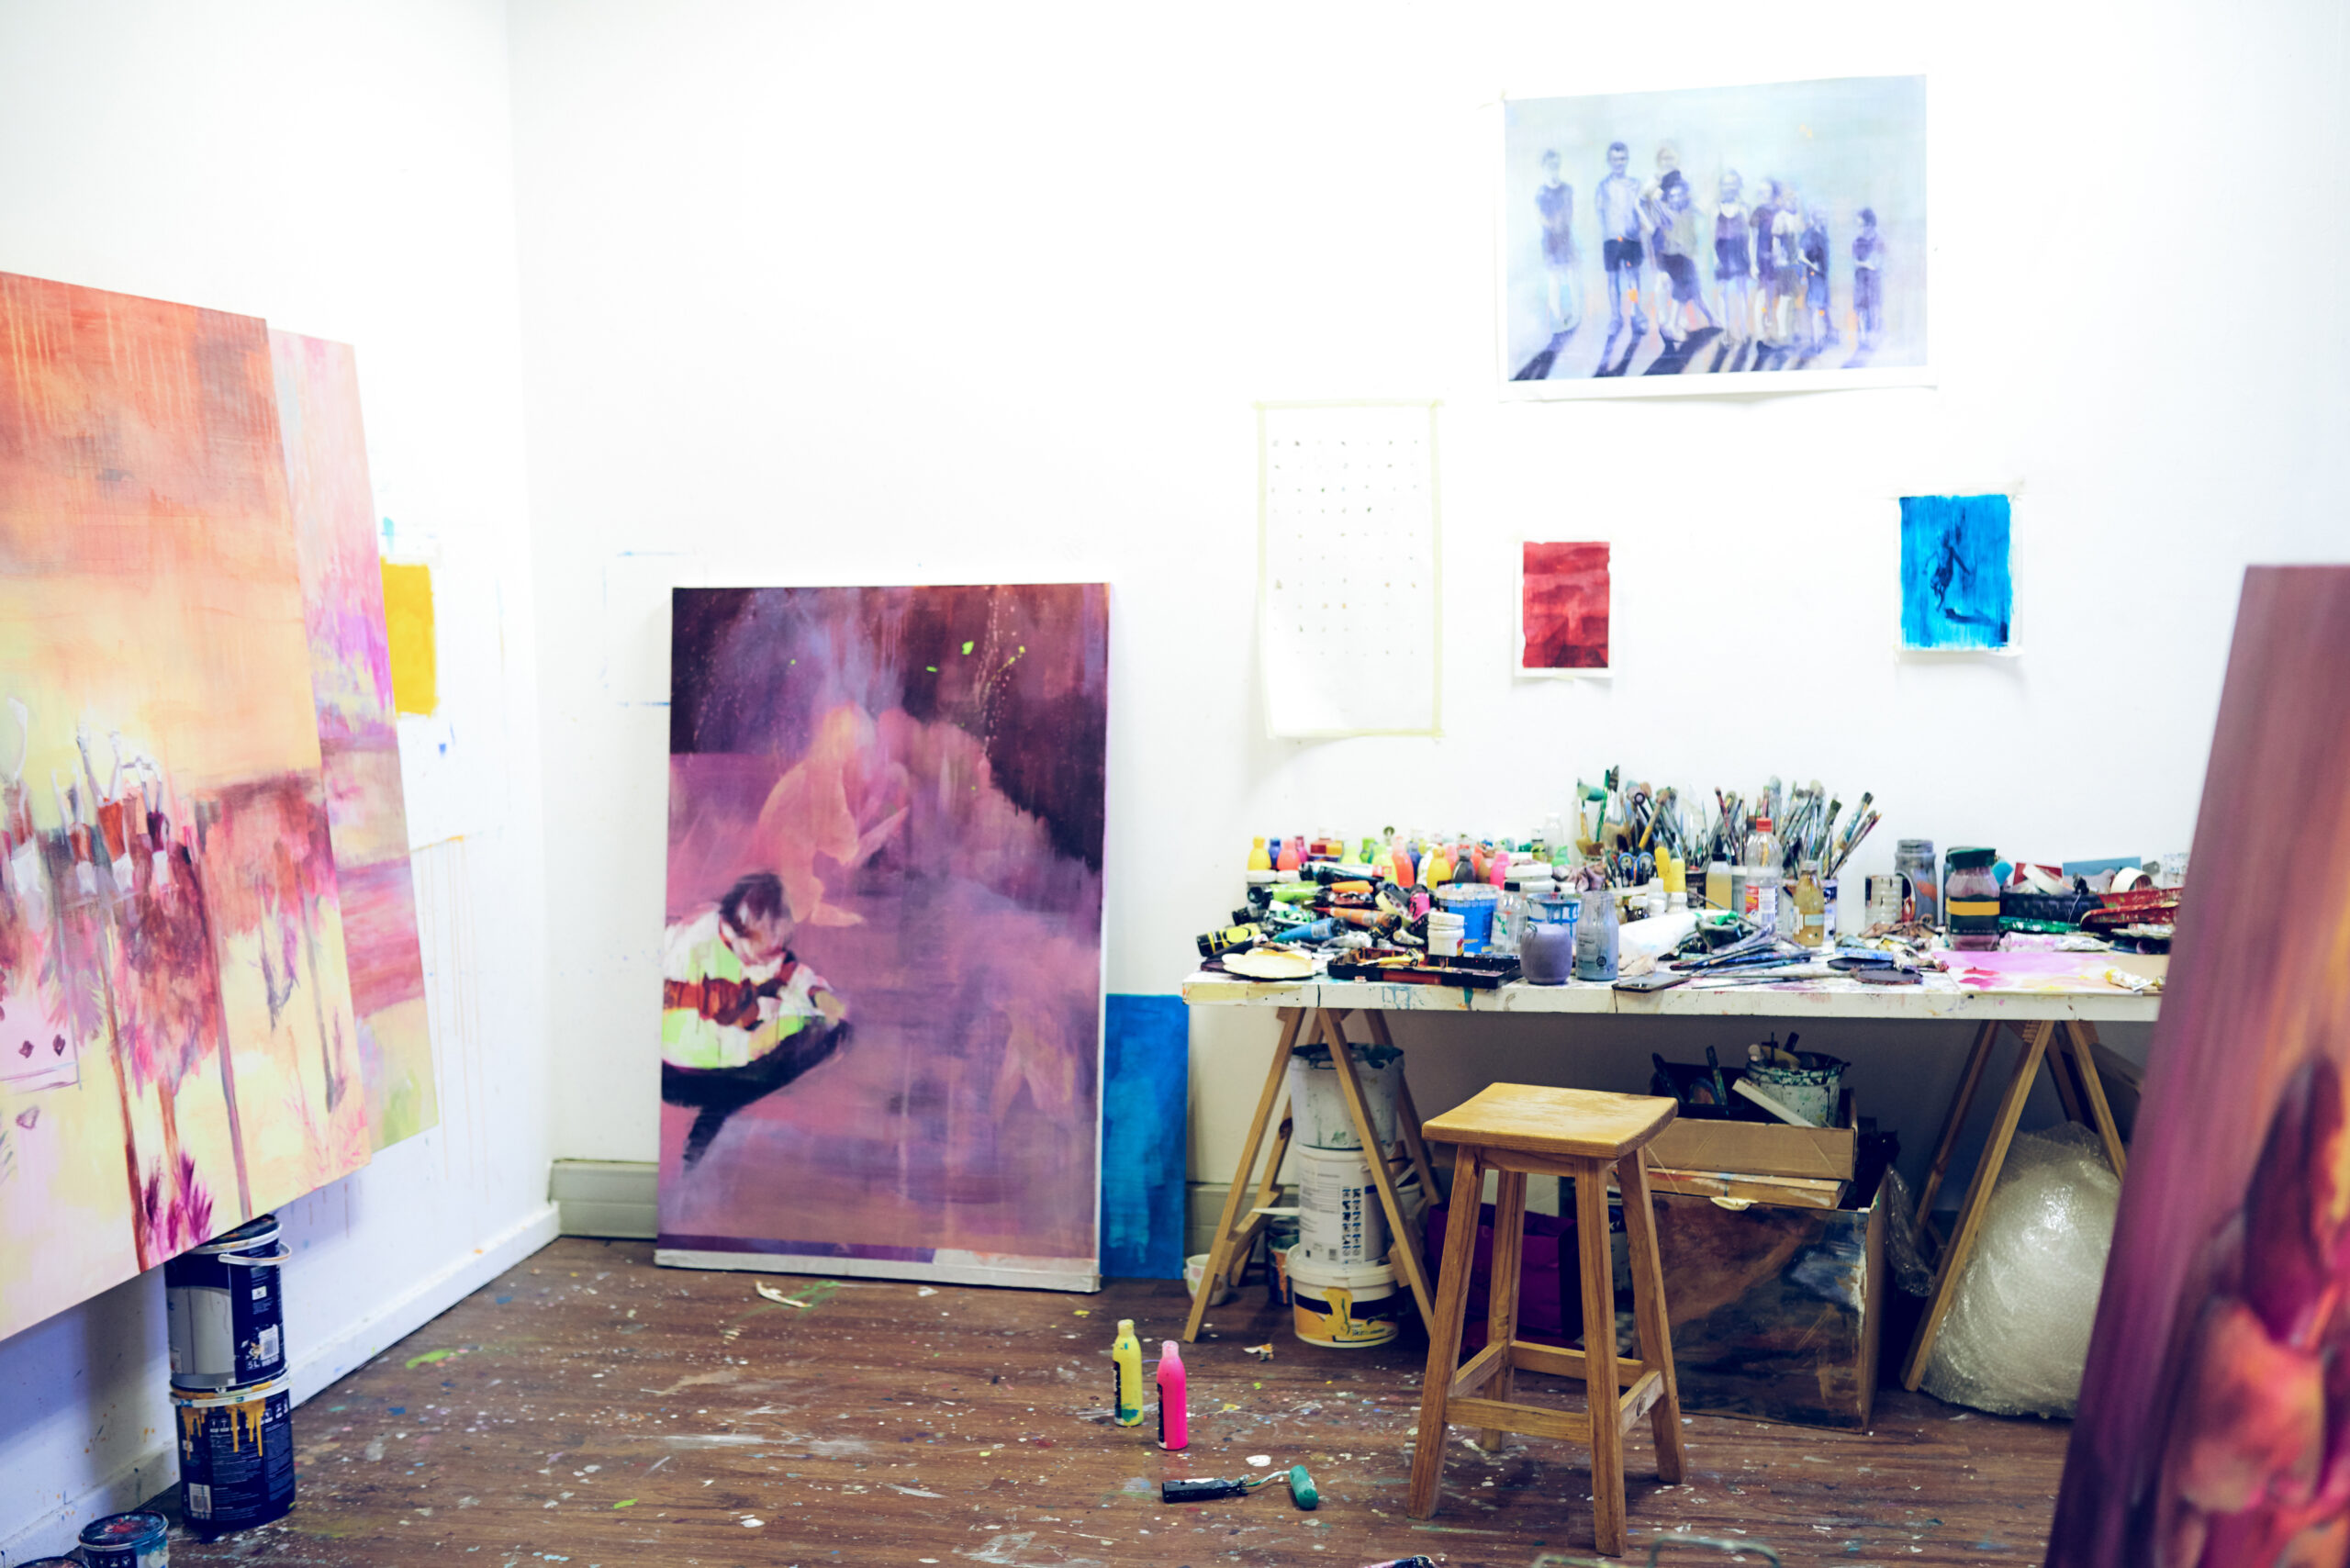 A photo of an artist's studio with canvases seen on stands and painting supplies situated on a table to the side.